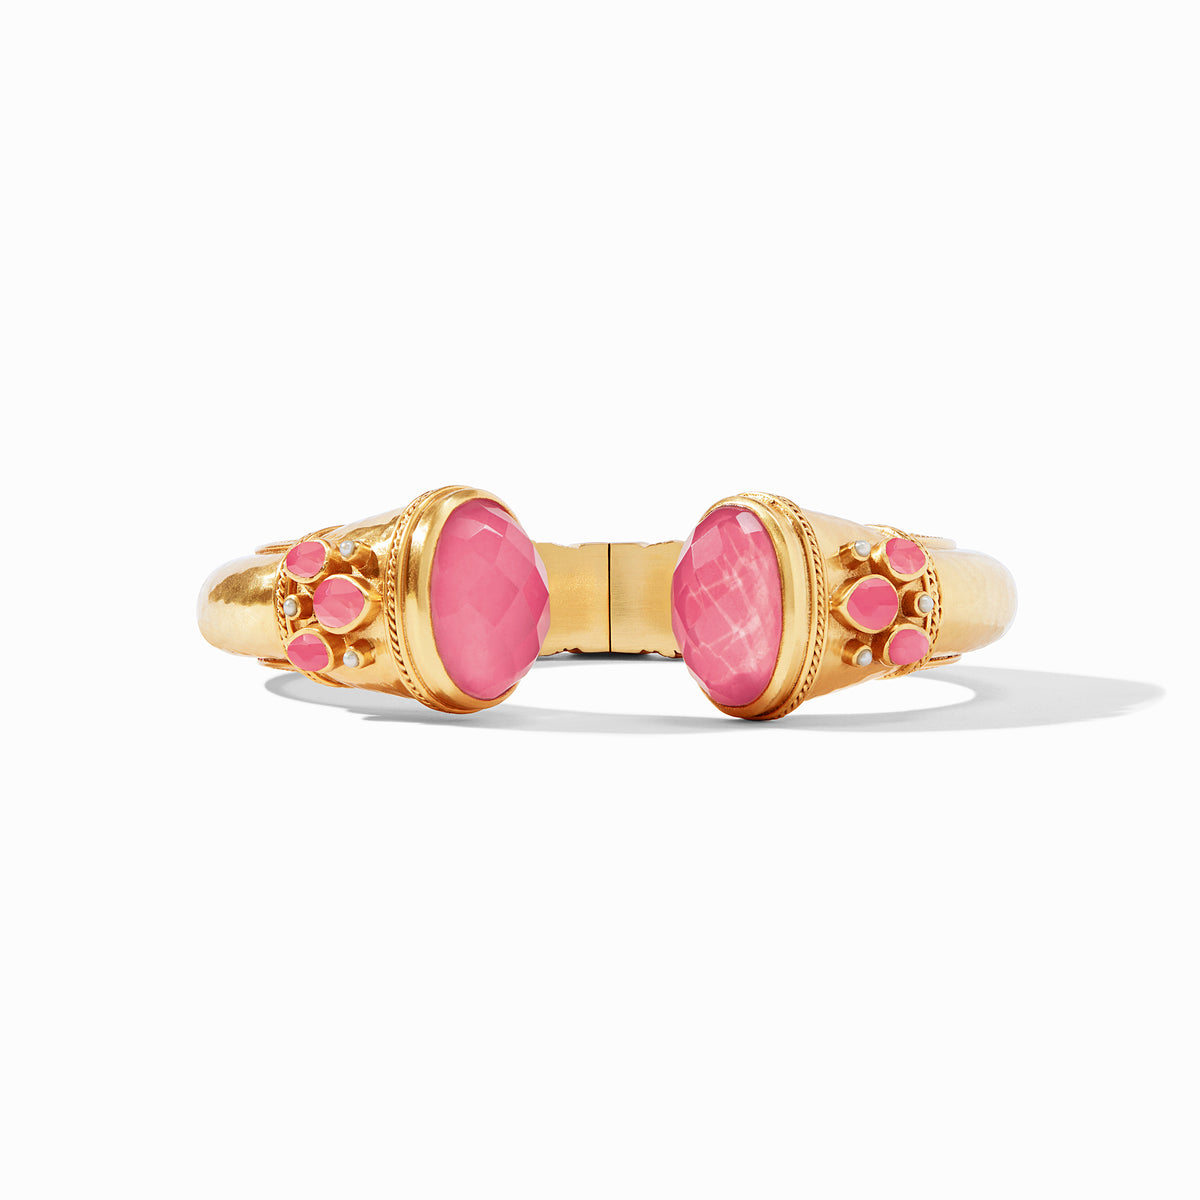 Julie Vos - Cannes Cuff, Iridescent Peony Pink